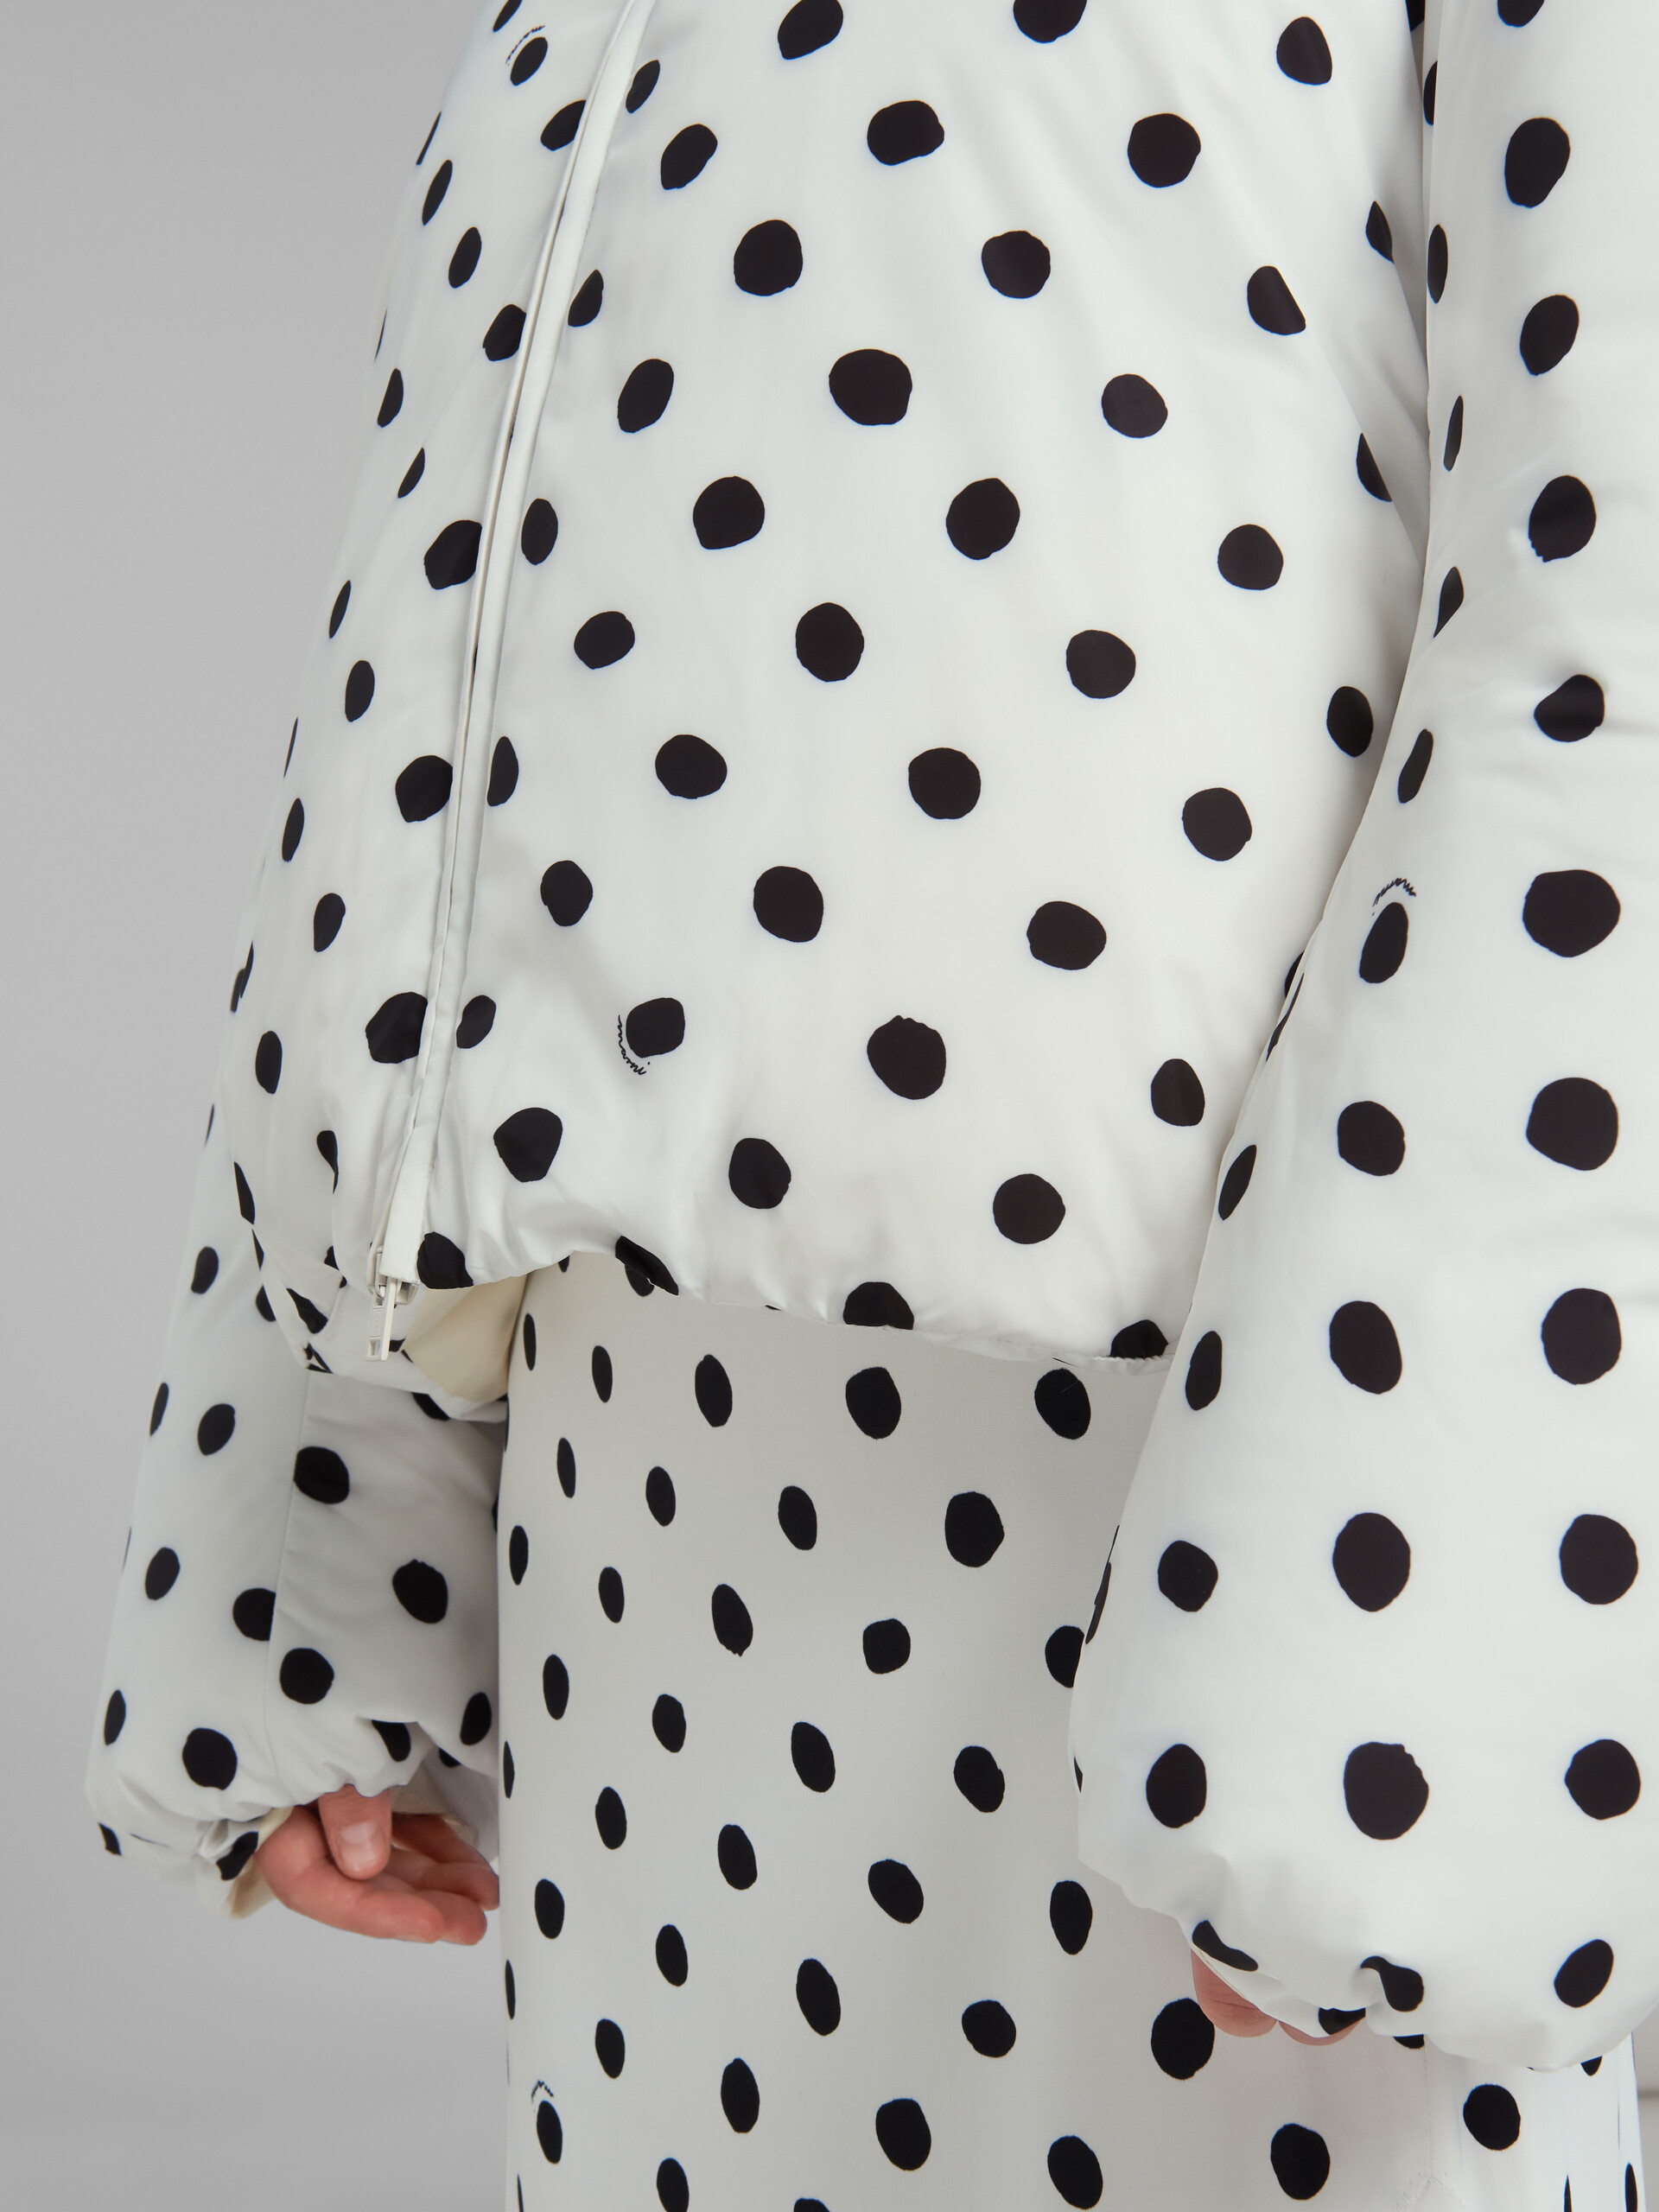 White oversized down jacket with polka dots - Winter jackets - Image 5